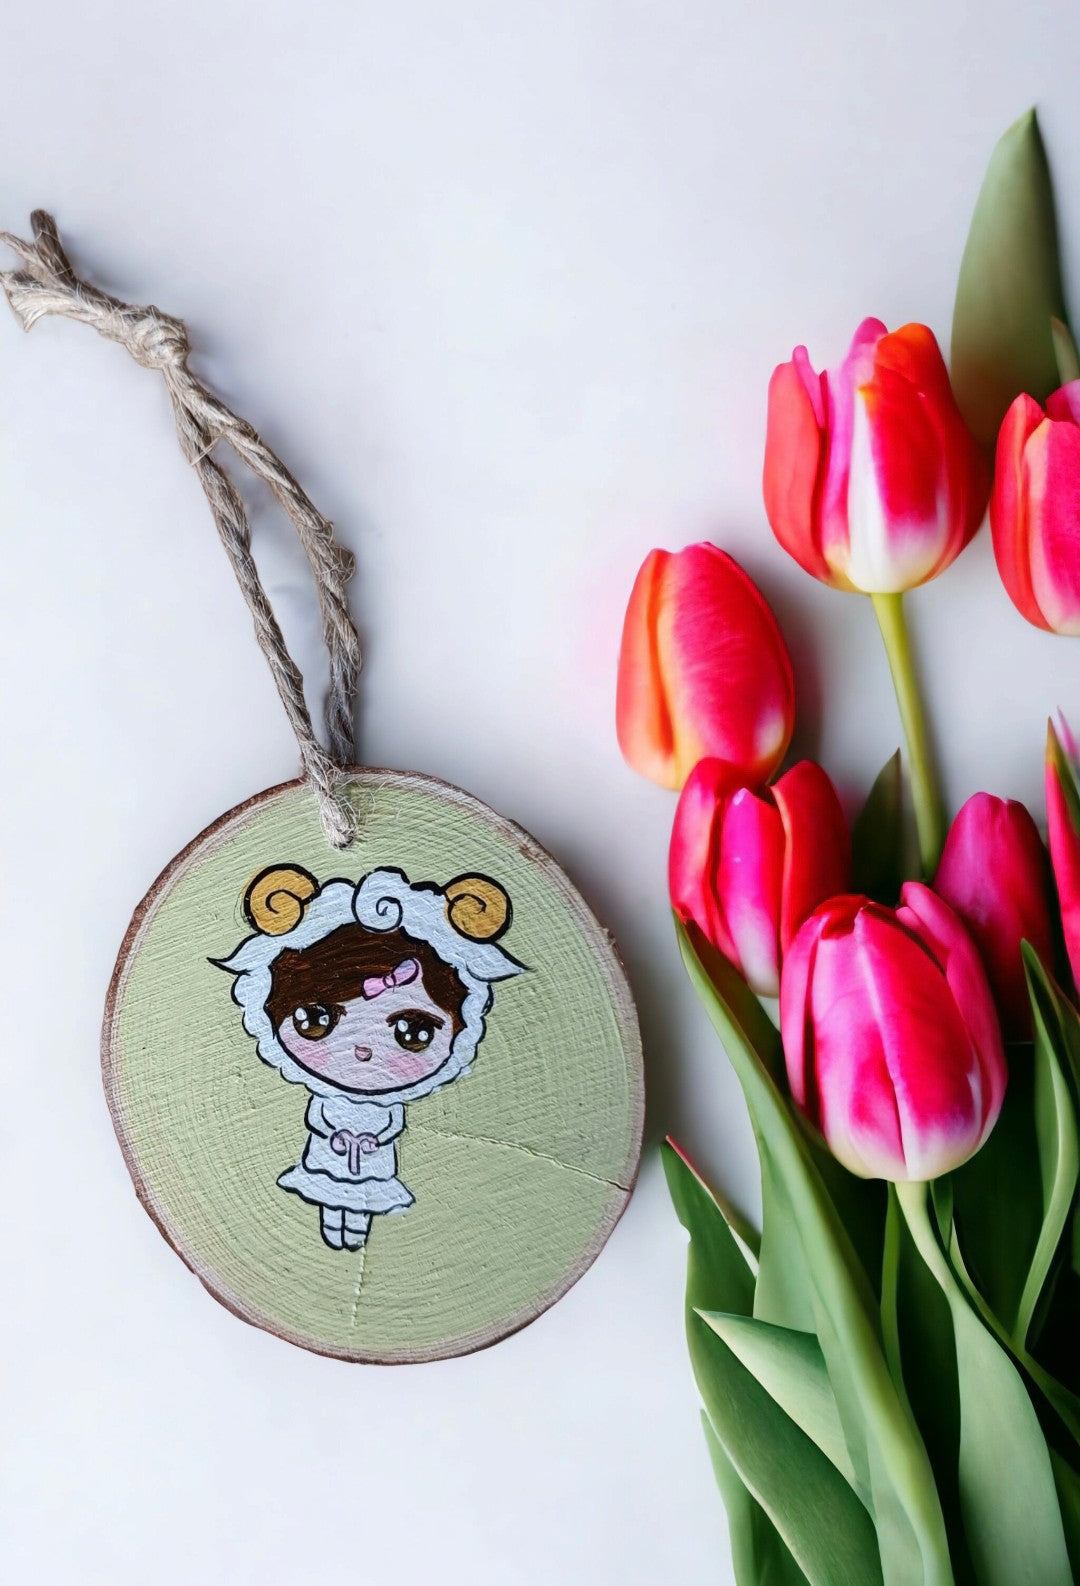 Emerald Blossoms - Hand painted Chibi Aries on Wood Slice